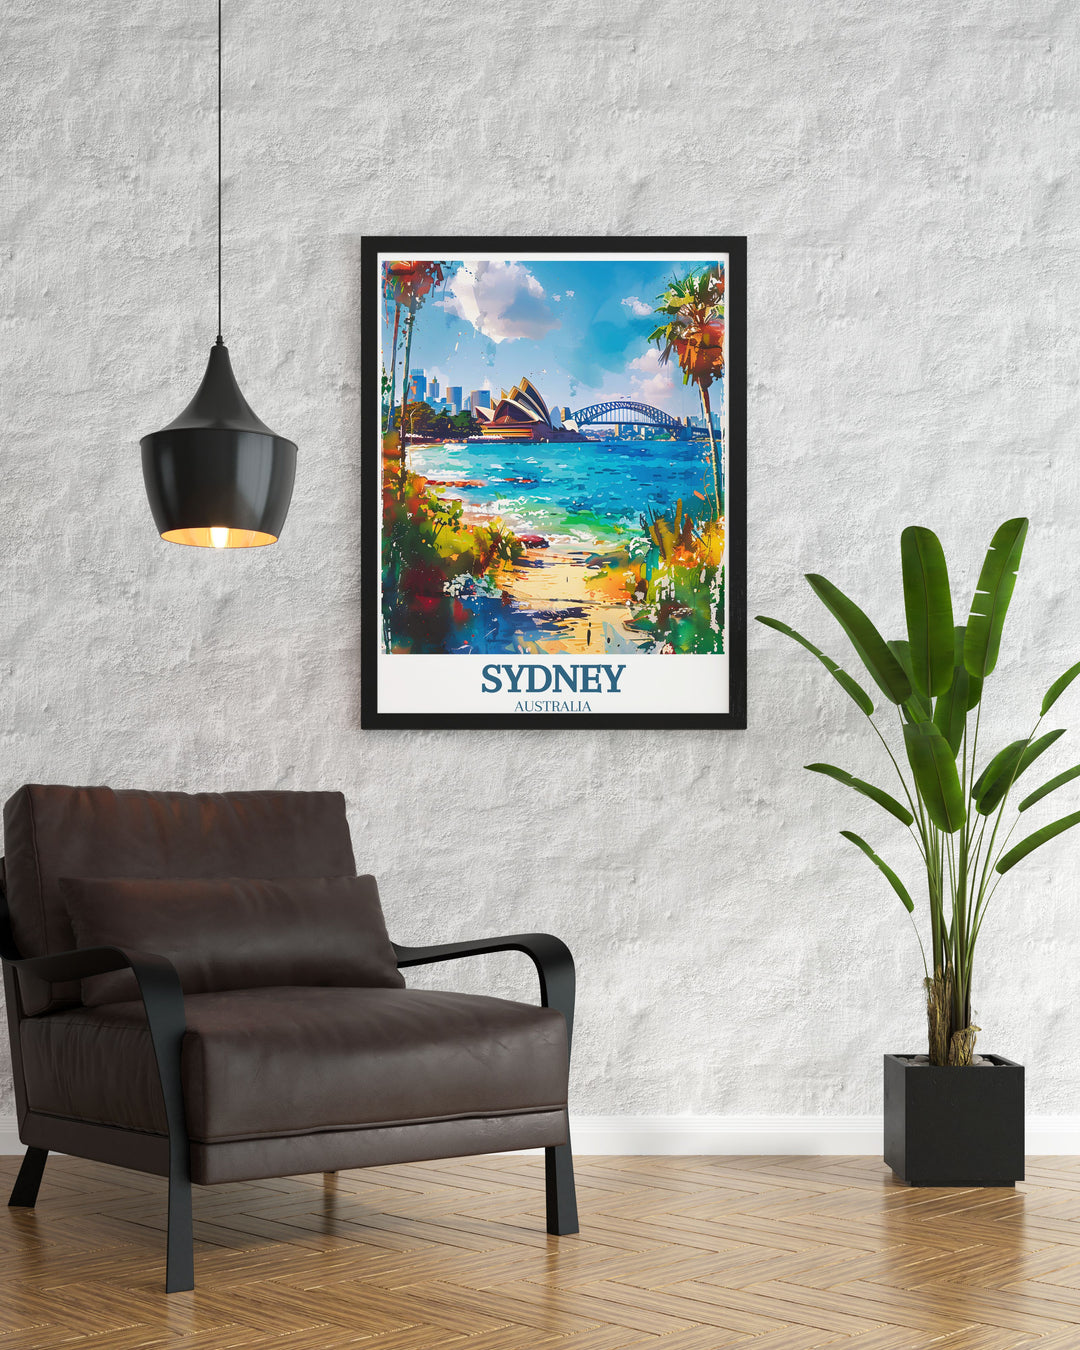 Retro Sydney poster featuring the Sydney Opera House and Sydney Harbour Bridge beautifully illustrated in a timeless design that brings the elegance of Australia to any living space enhancing your home decor with a piece of iconic Sydney